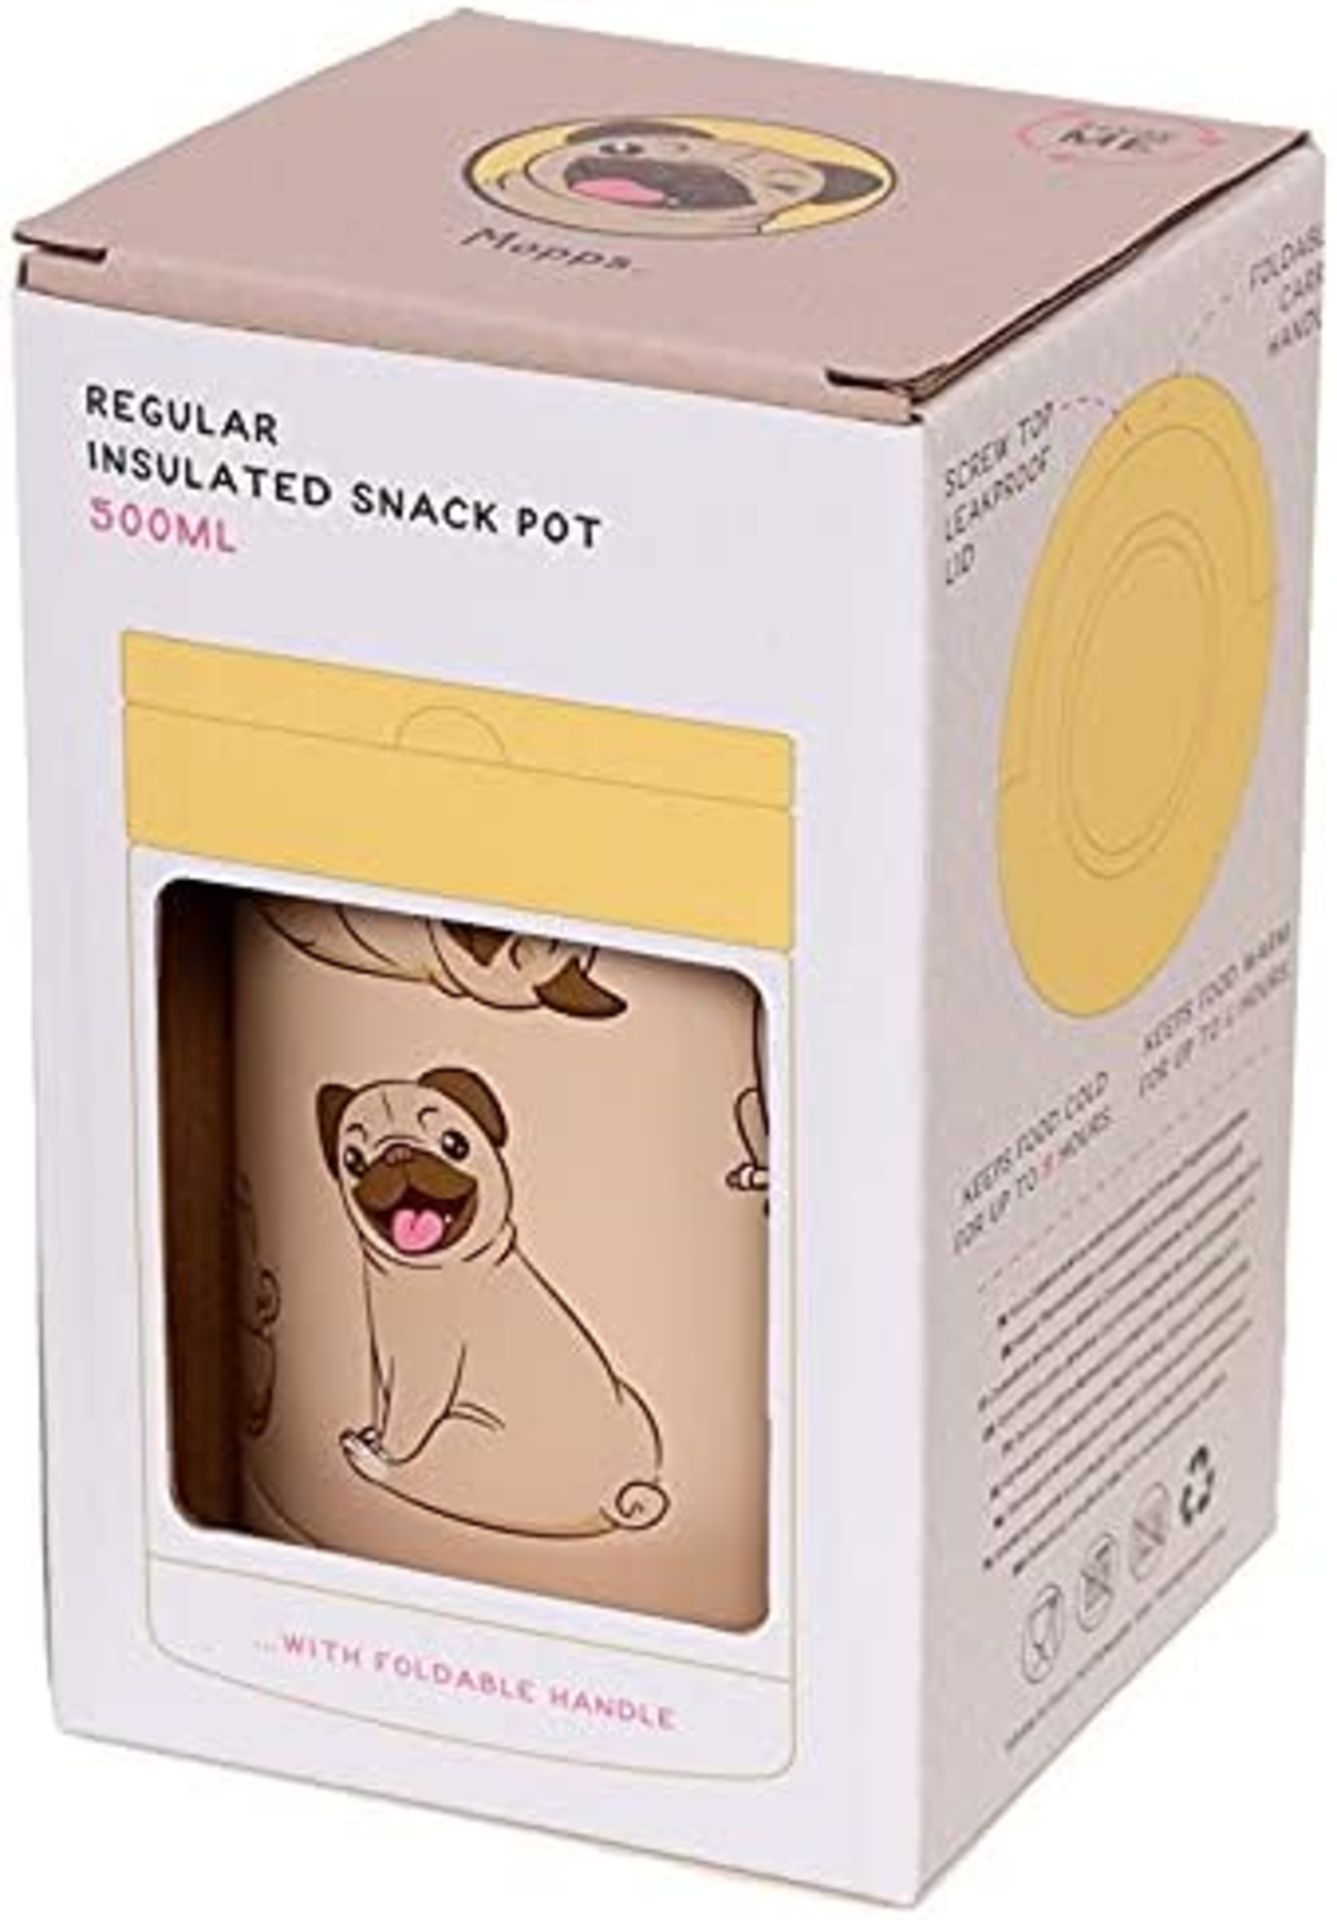 16 X NEW PUG HOT & COLD LUNCH POT 500ML - Image 2 of 4